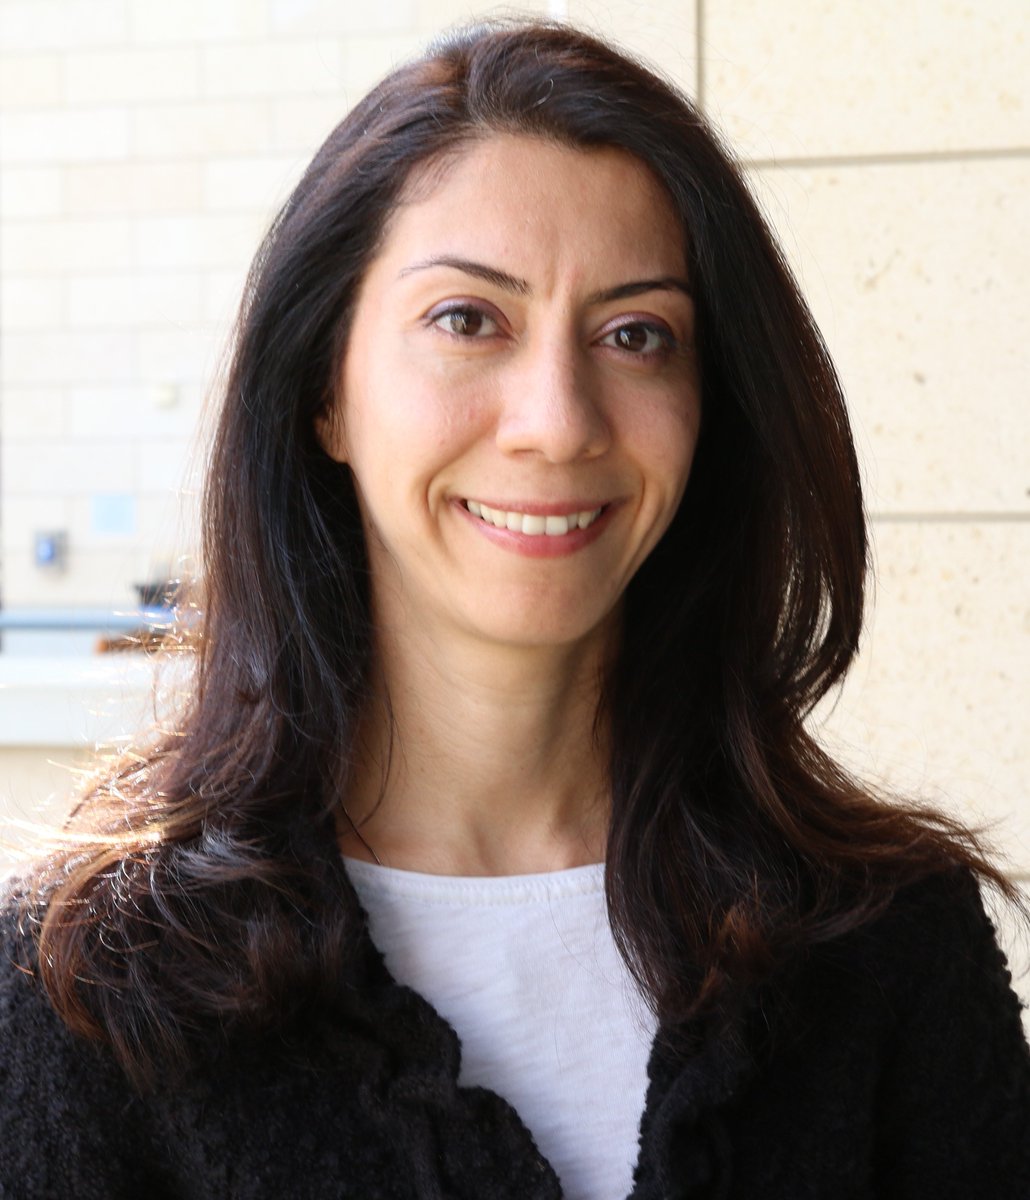 Announcing two more speakers participating in #WiDS2020 Stanford! @NewshaAjami, Director of Urban Water Policy at @Stanford, and @Dr_TalithiaW, Associate Dean and Associate Mathematics Professor at @harveymudd. widsconference.org/speakers @StanfordWoods @westcenter @WaterintheWest